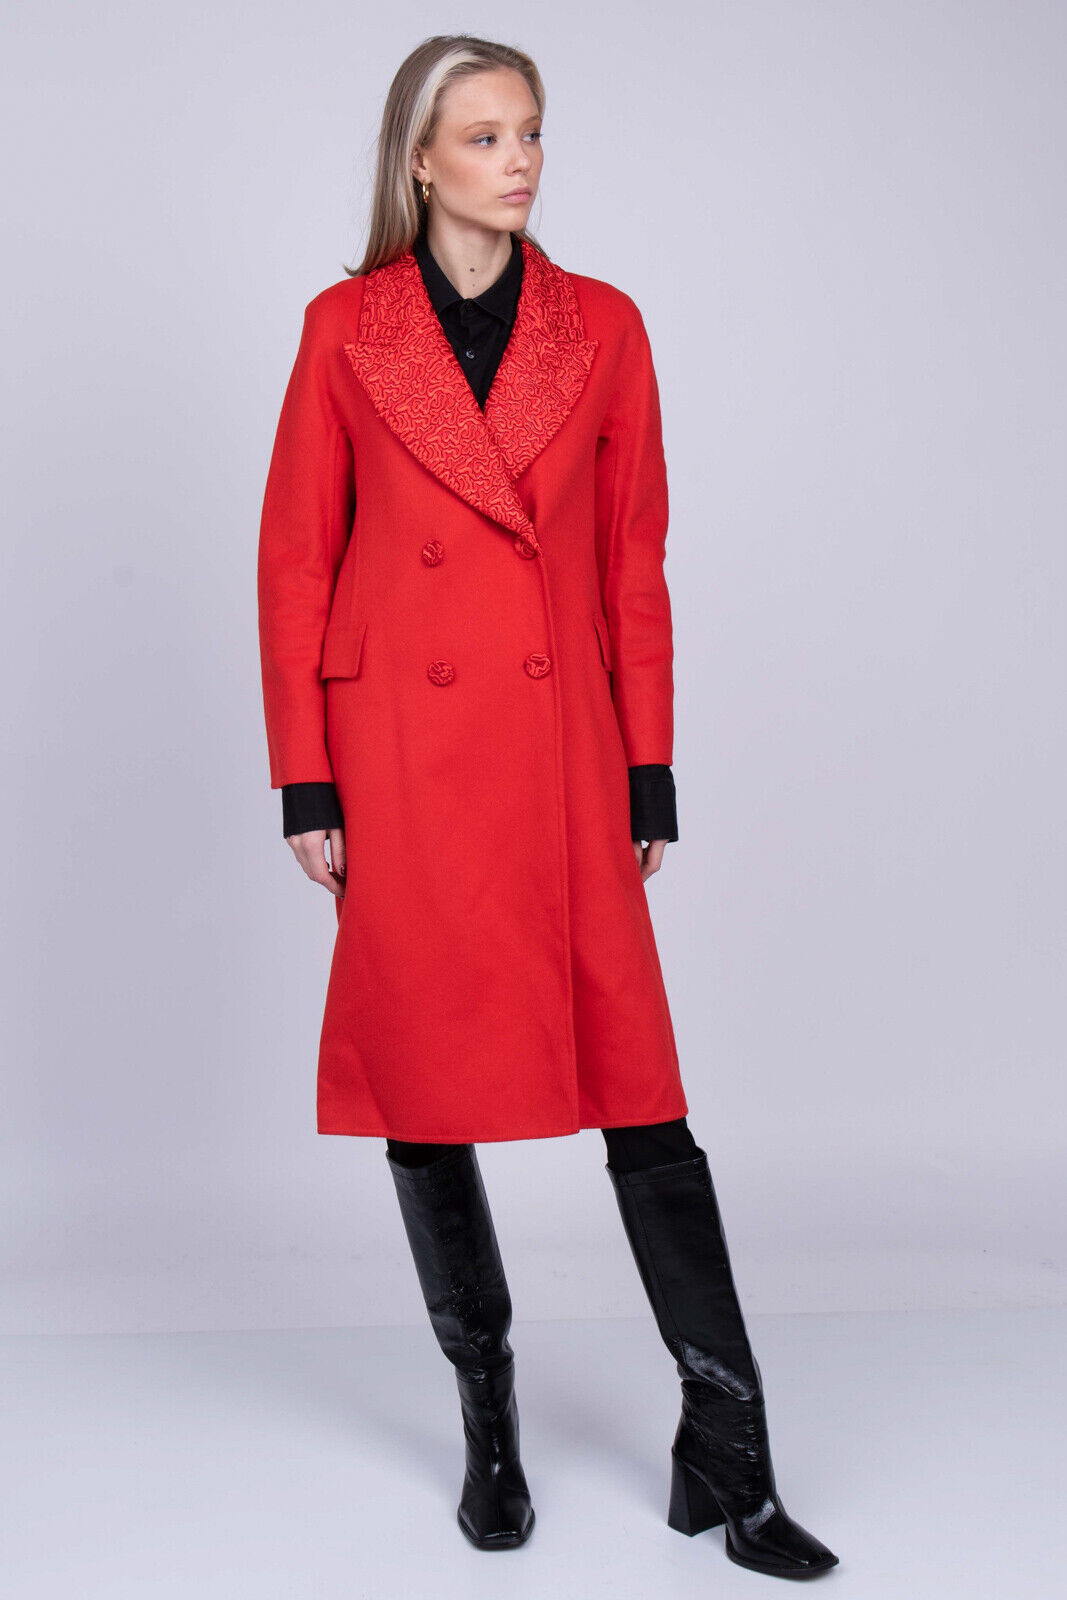 ERMANNO SCERVINO Cashmere Angora & Wool Topcoat Size IT 38 / XXS-XS  RRP$1955 Red